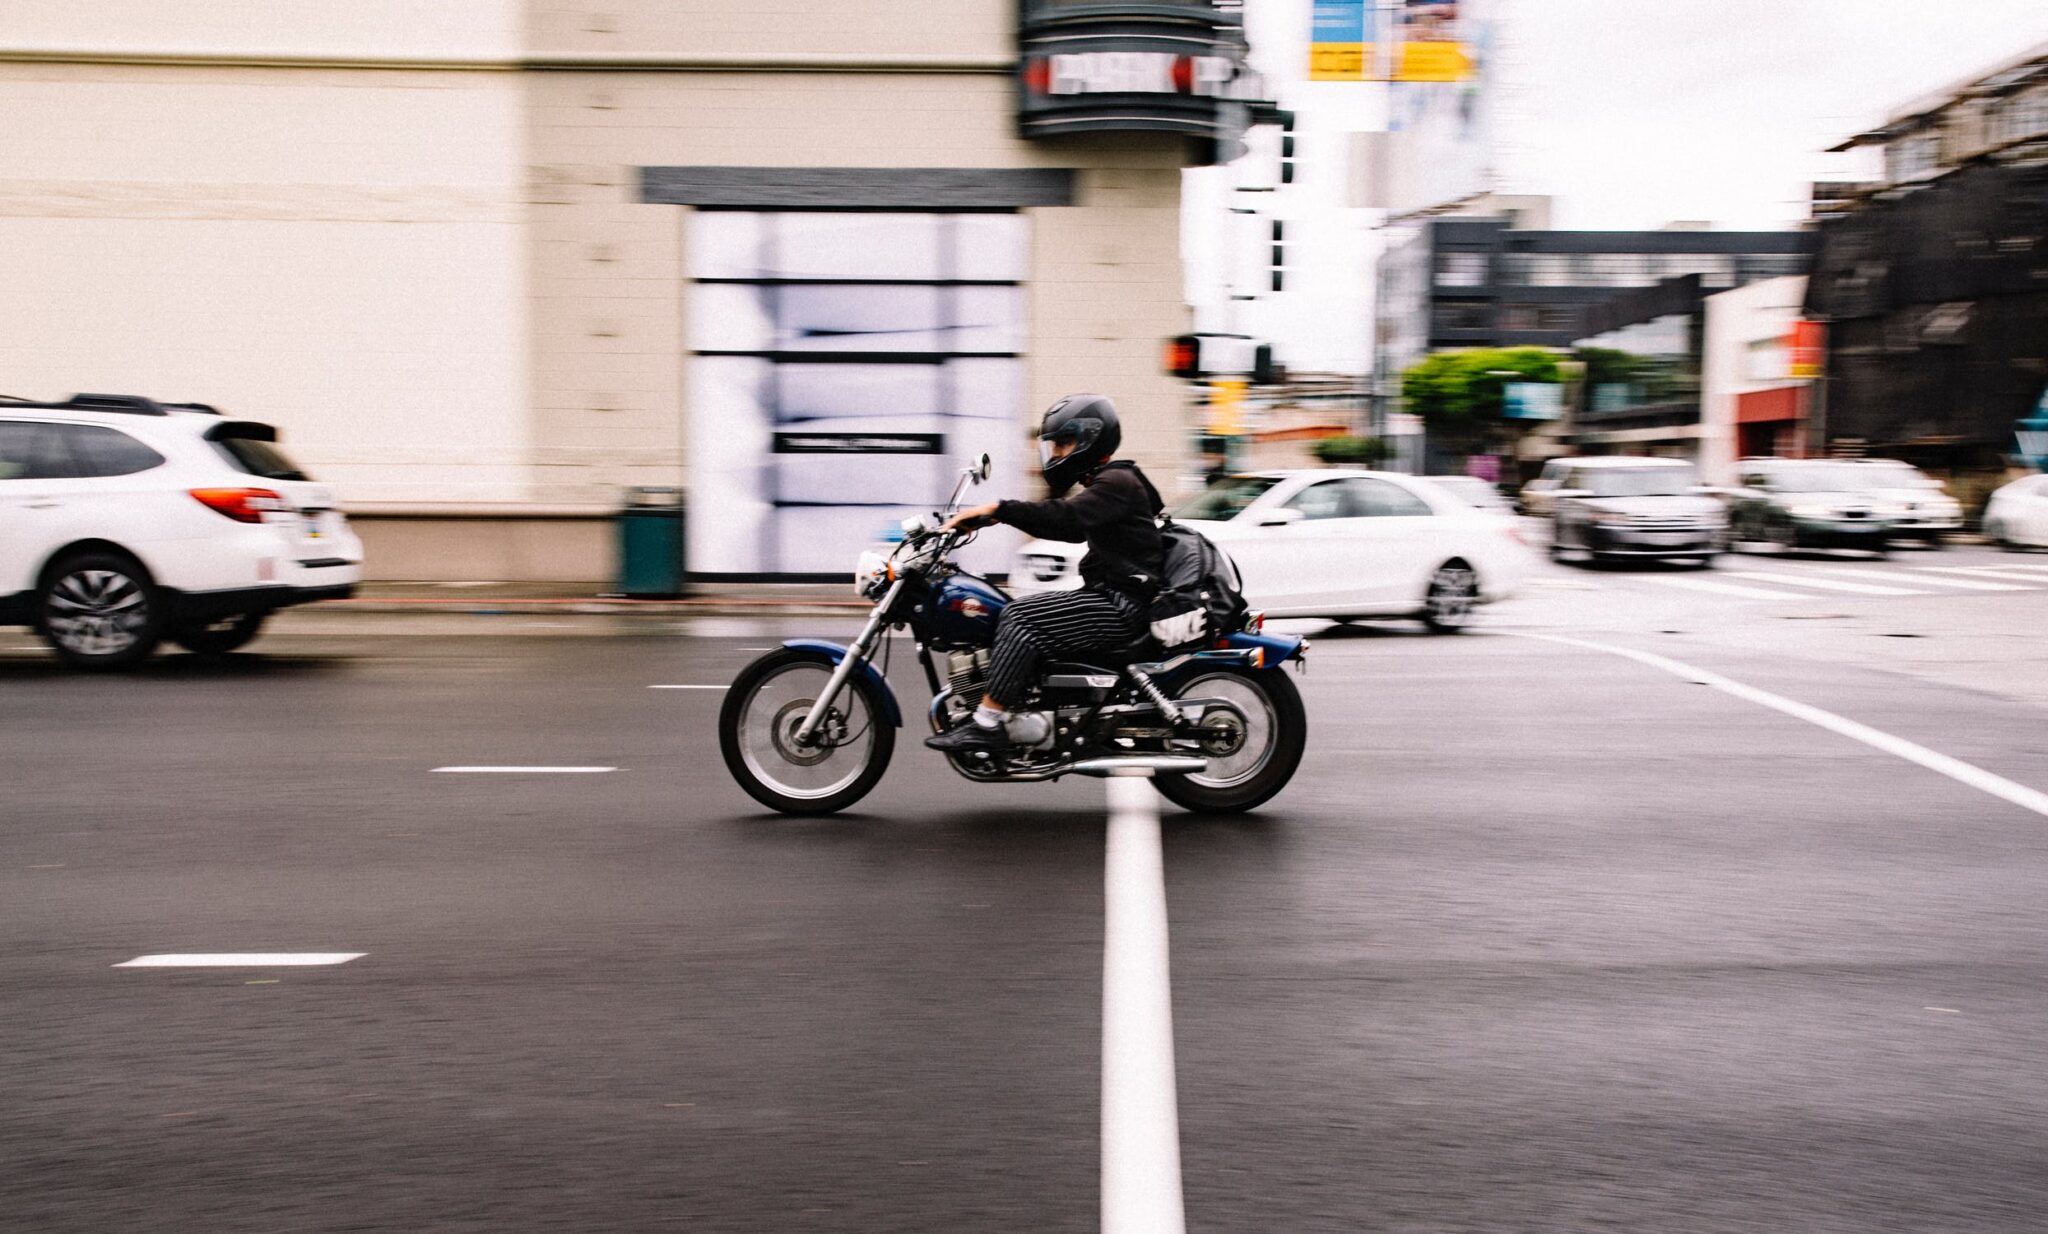 Motorcycle VS Motorist Accidents: What You Can Do About Them